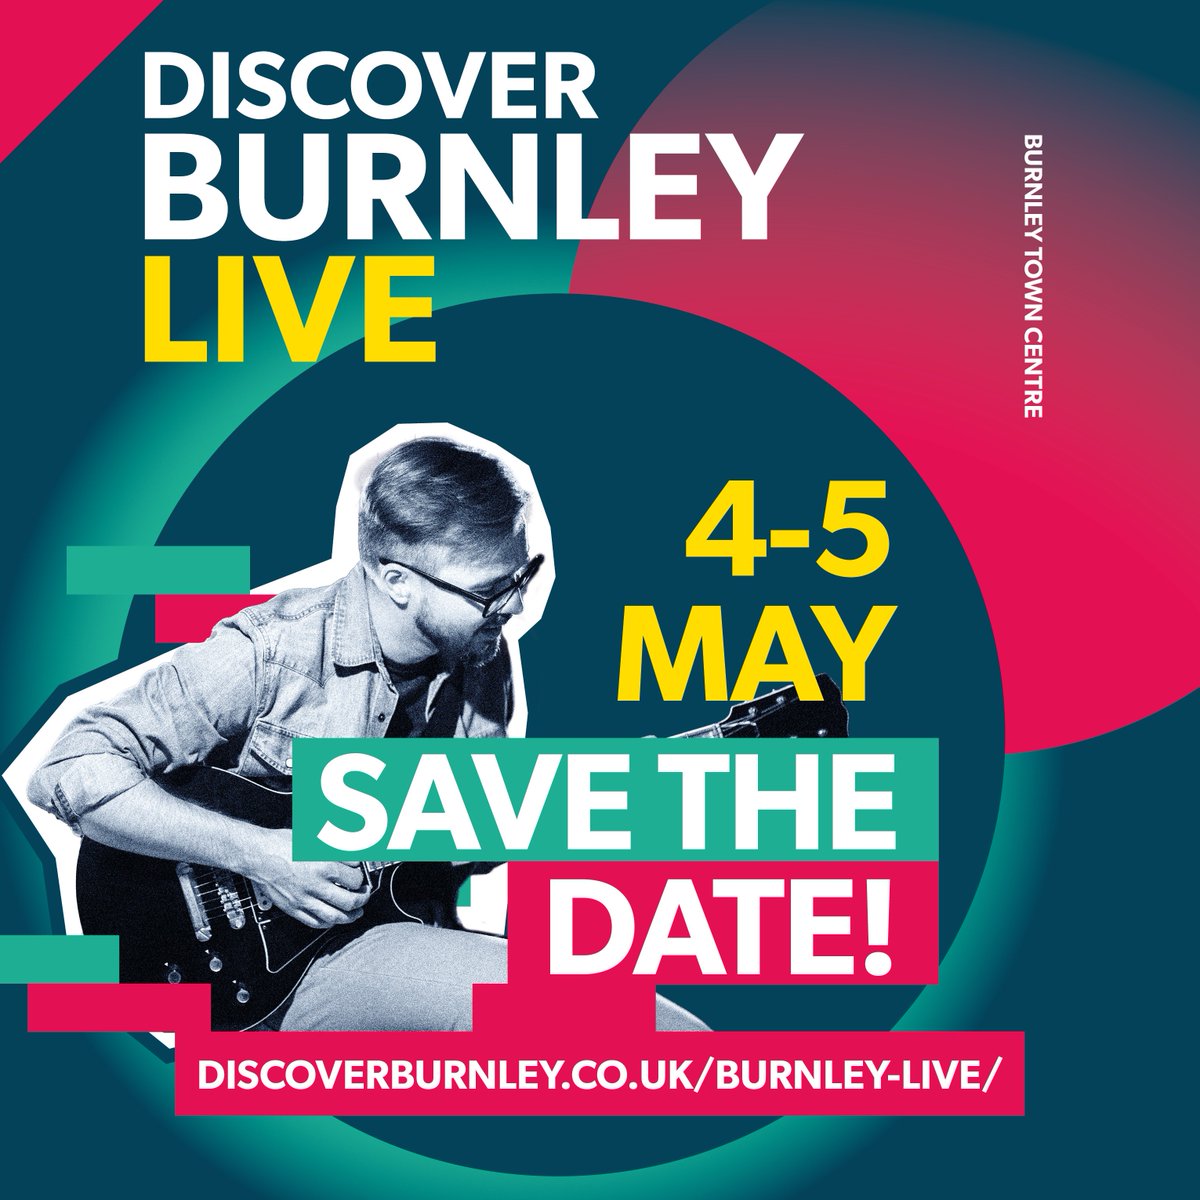 The first batch of singers and performers for #Burnley Live has been revealed! 🎼🎤 Head over to our website now to see who's taking to the stage and start planning your weekend. 👇 🔗 - discoverburnley.co.uk/burnley-live/ @charterwalk @burnleycouk